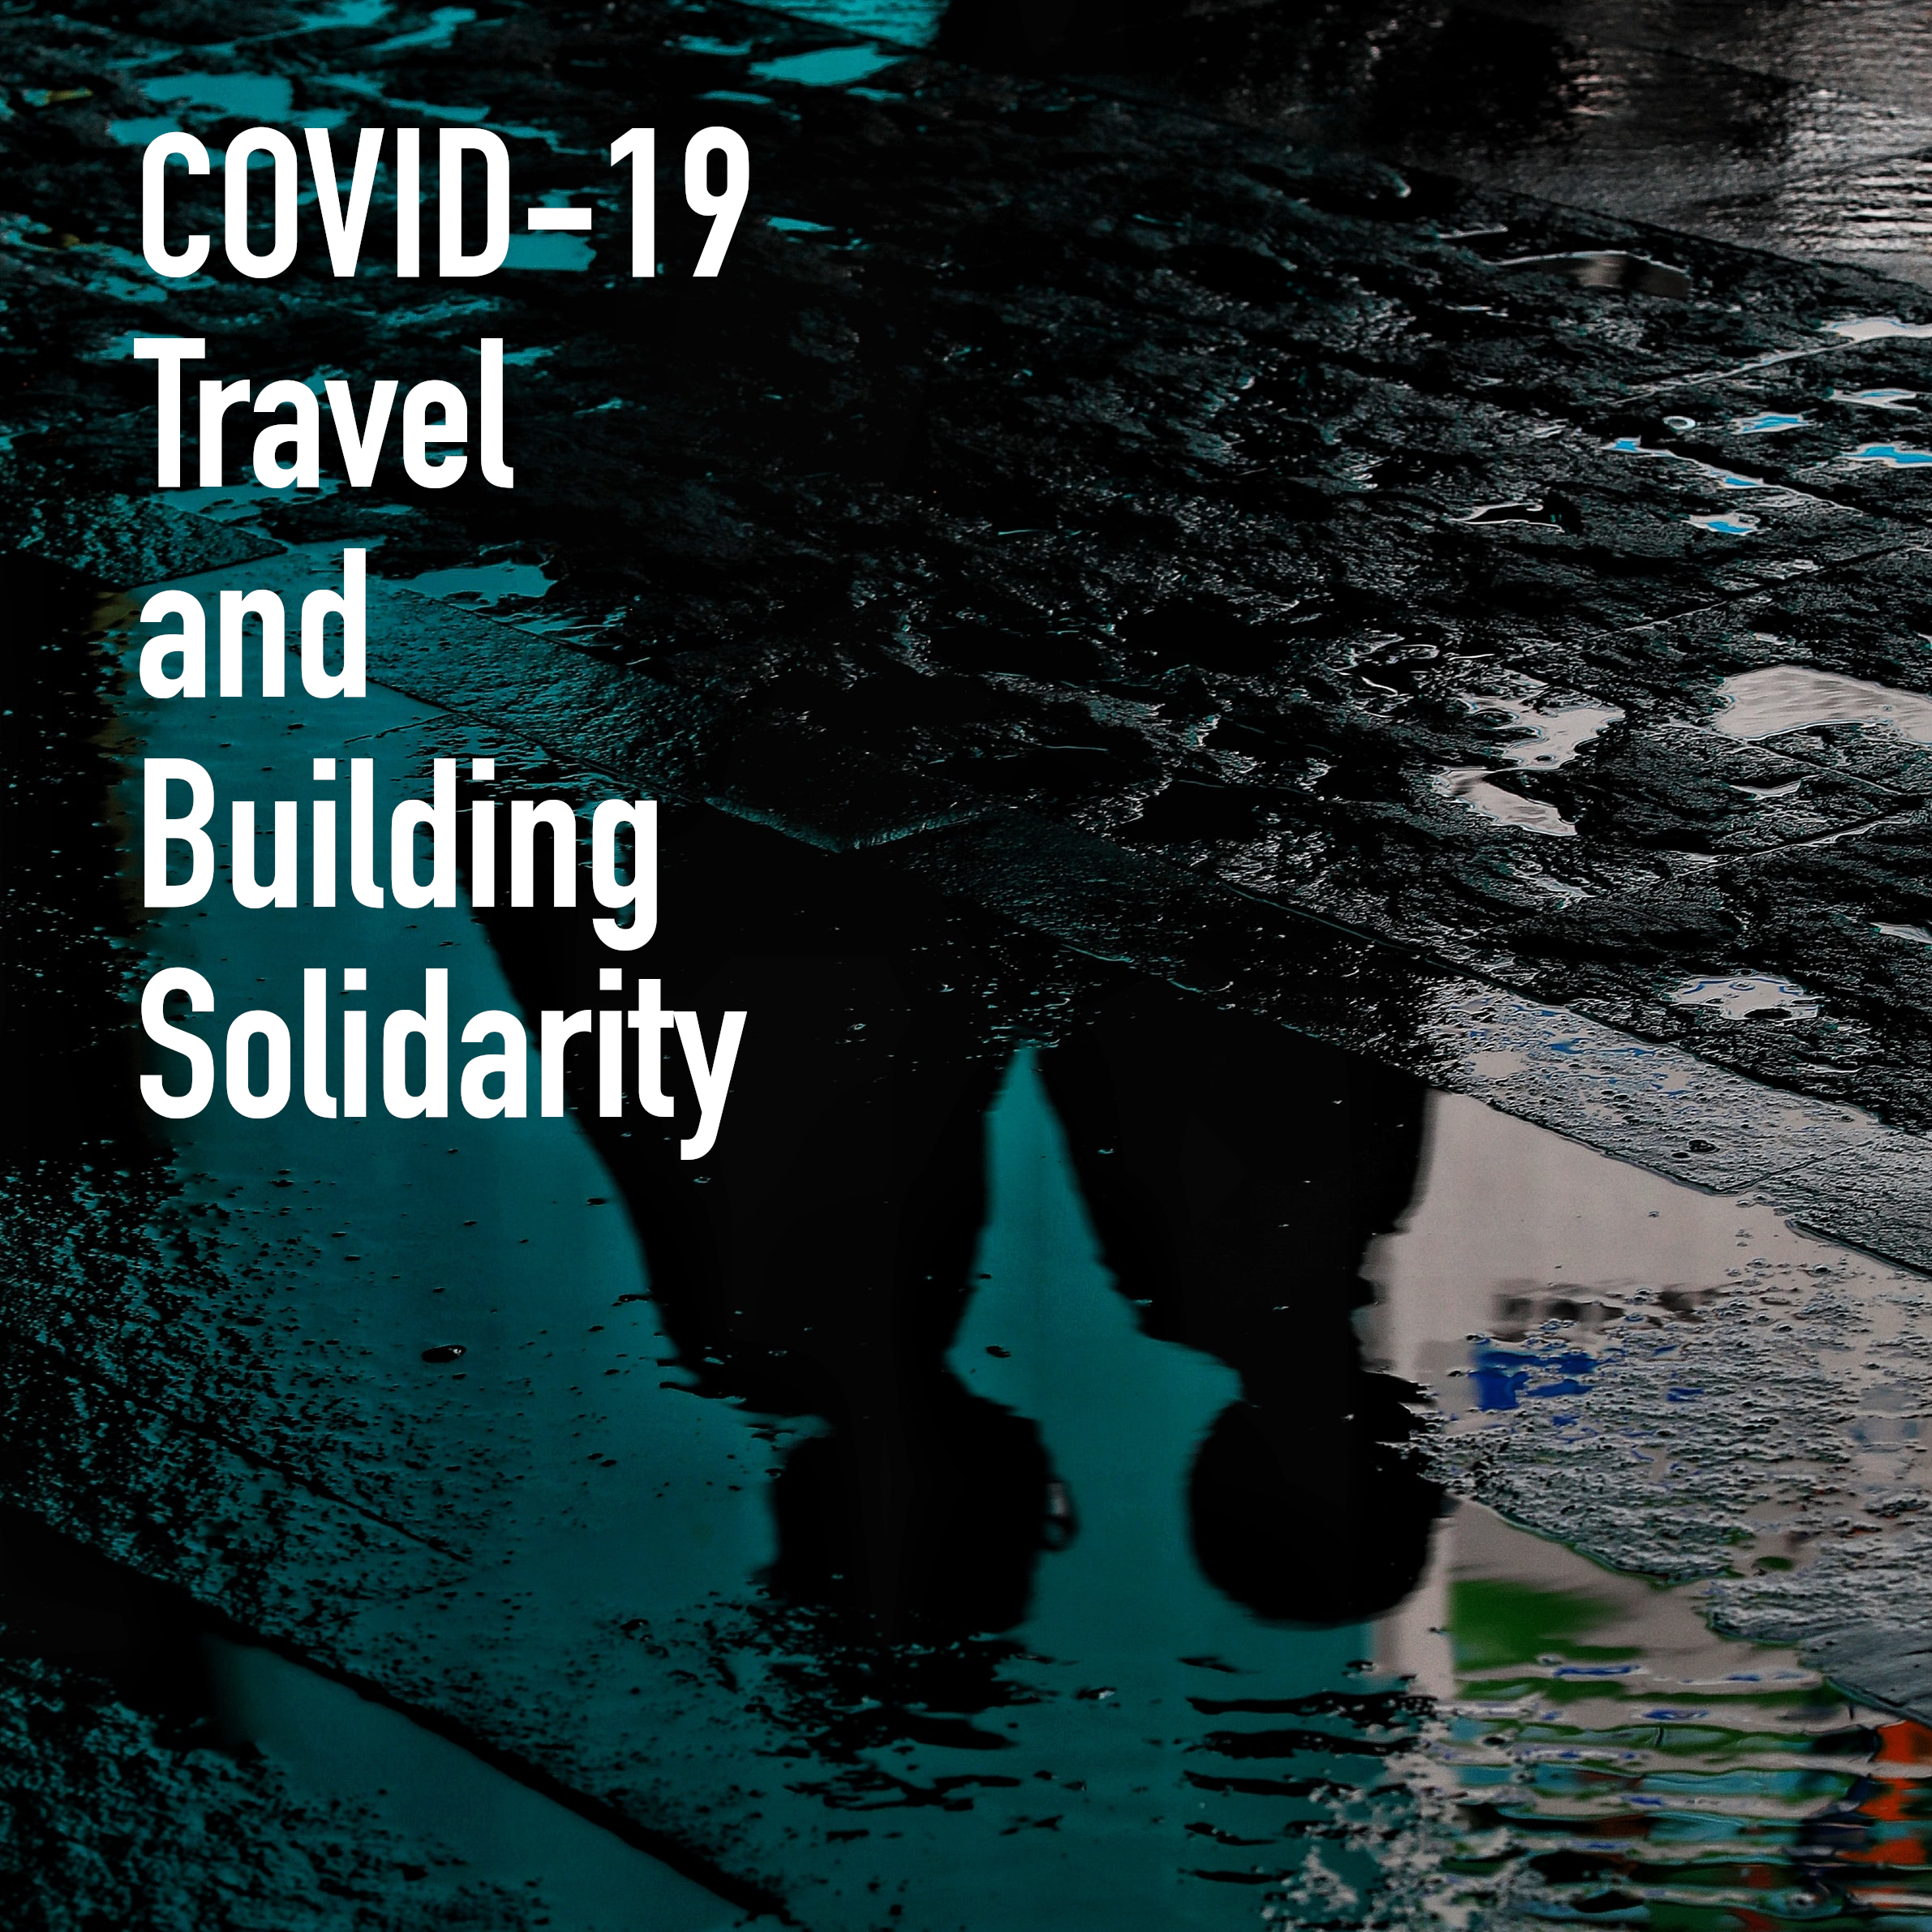 11. COVID-19, Travel and Building Solidarity